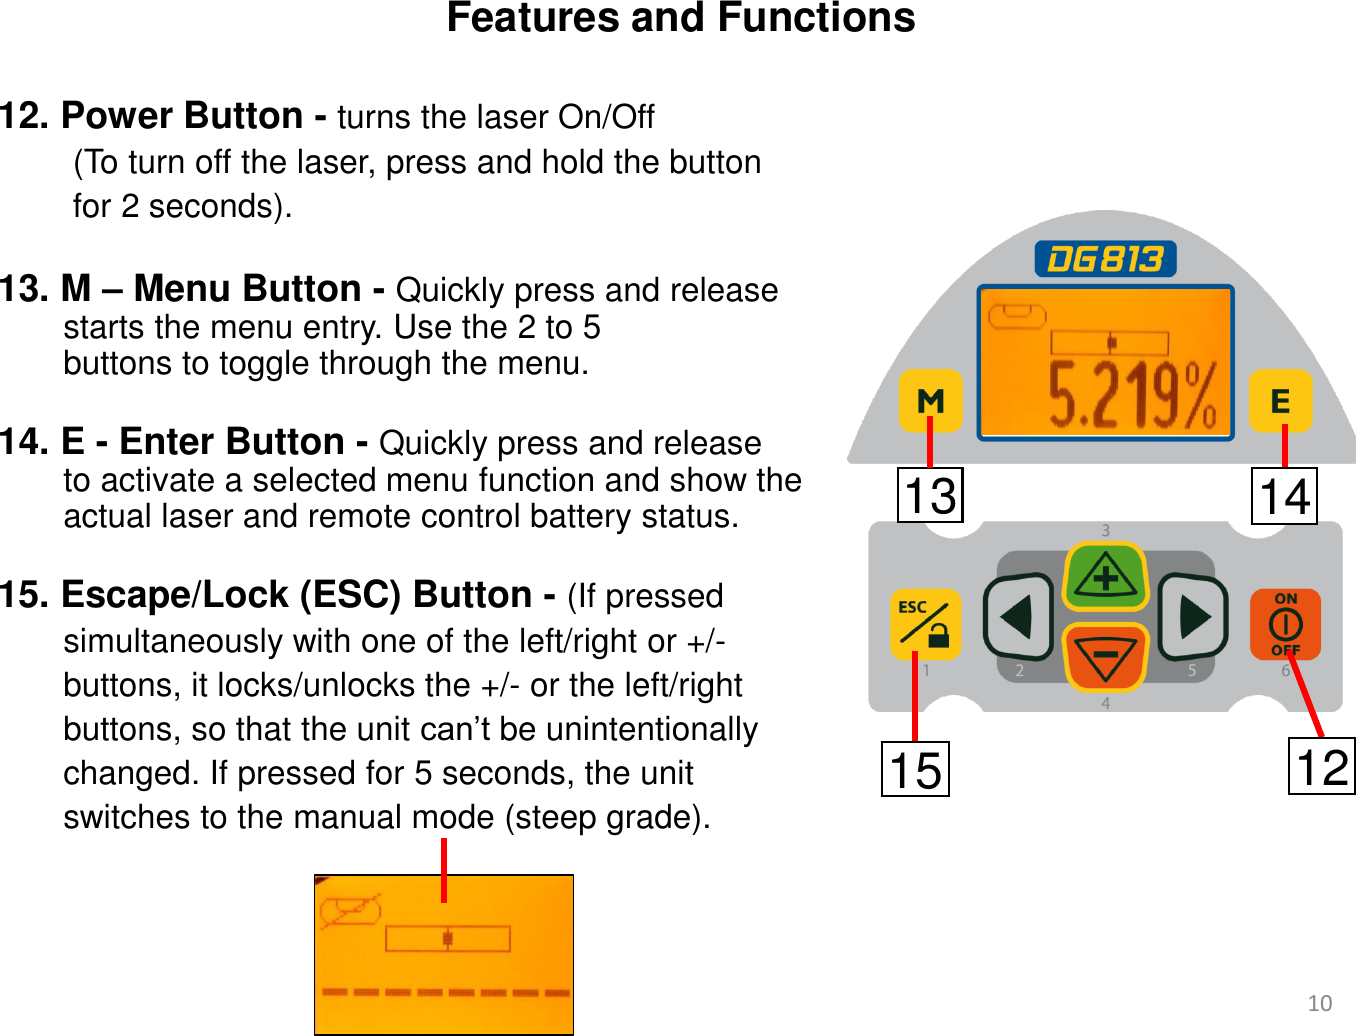 Features and Functions 12. Power Button - turns the laser On/Off           (To turn off the laser, press and hold the button          for 2 seconds).           13. M – Menu Button - Quickly press and release        starts the menu entry. Use the 2 to 5        buttons to toggle through the menu.   14. E - Enter Button - Quickly press and release         to activate a selected menu function and show the        actual laser and remote control battery status.   15. Escape/Lock (ESC) Button - (If pressed         simultaneously with one of the left/right or +/-         buttons, it locks/unlocks the +/- or the left/right         buttons, so that the unit can’t be unintentionally         changed. If pressed for 5 seconds, the unit         switches to the manual mode (steep grade). 13 14 15 12 10 